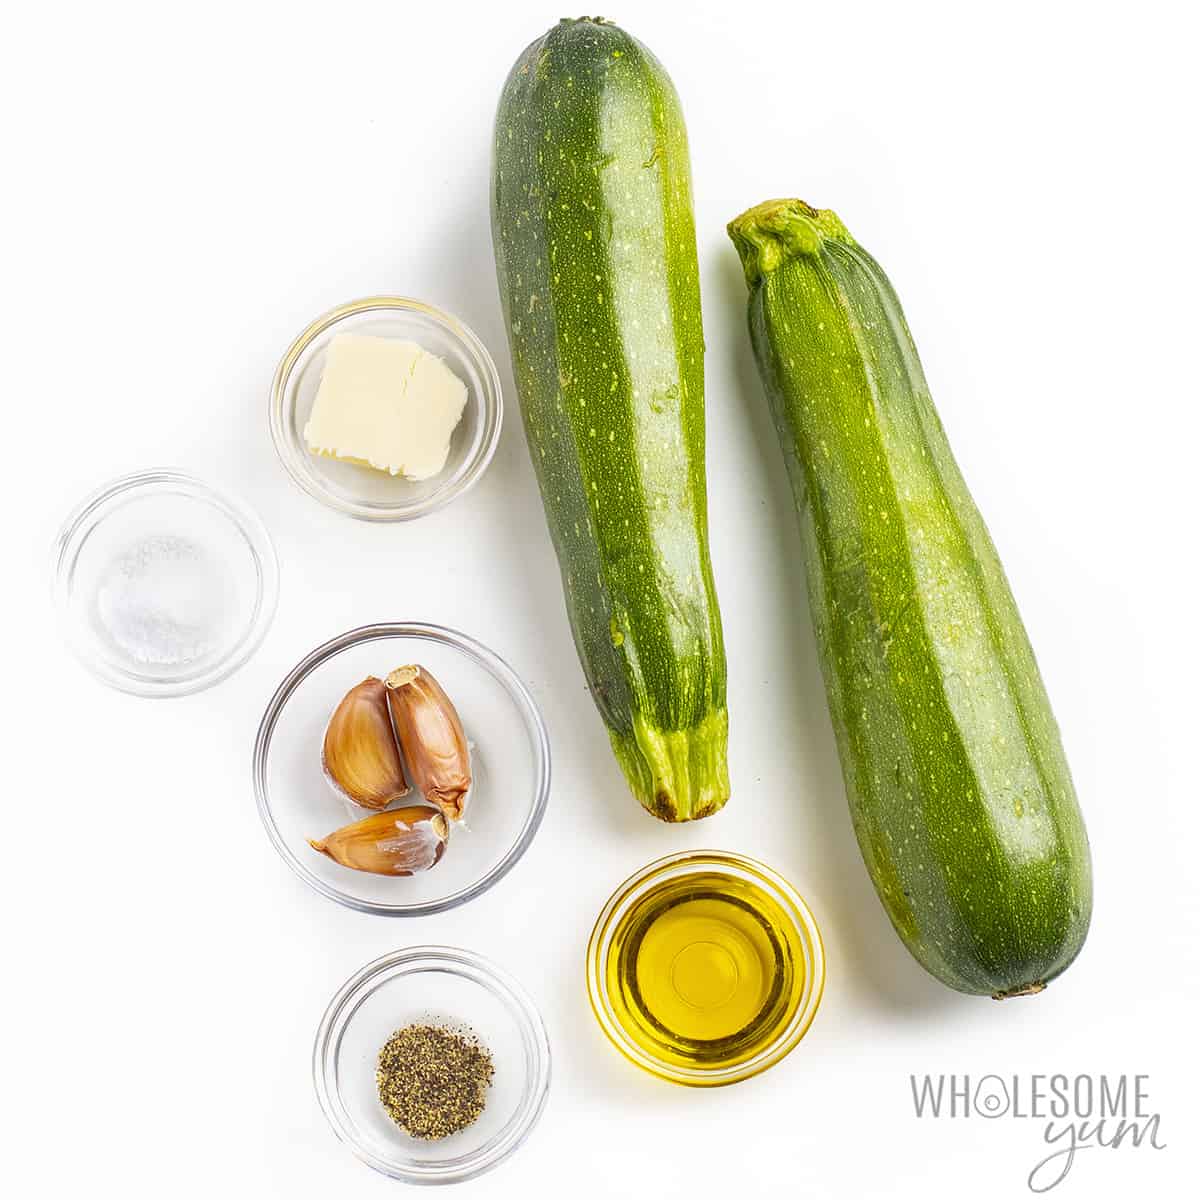 How long to cook zucchini? - THEKITCHENKNOW